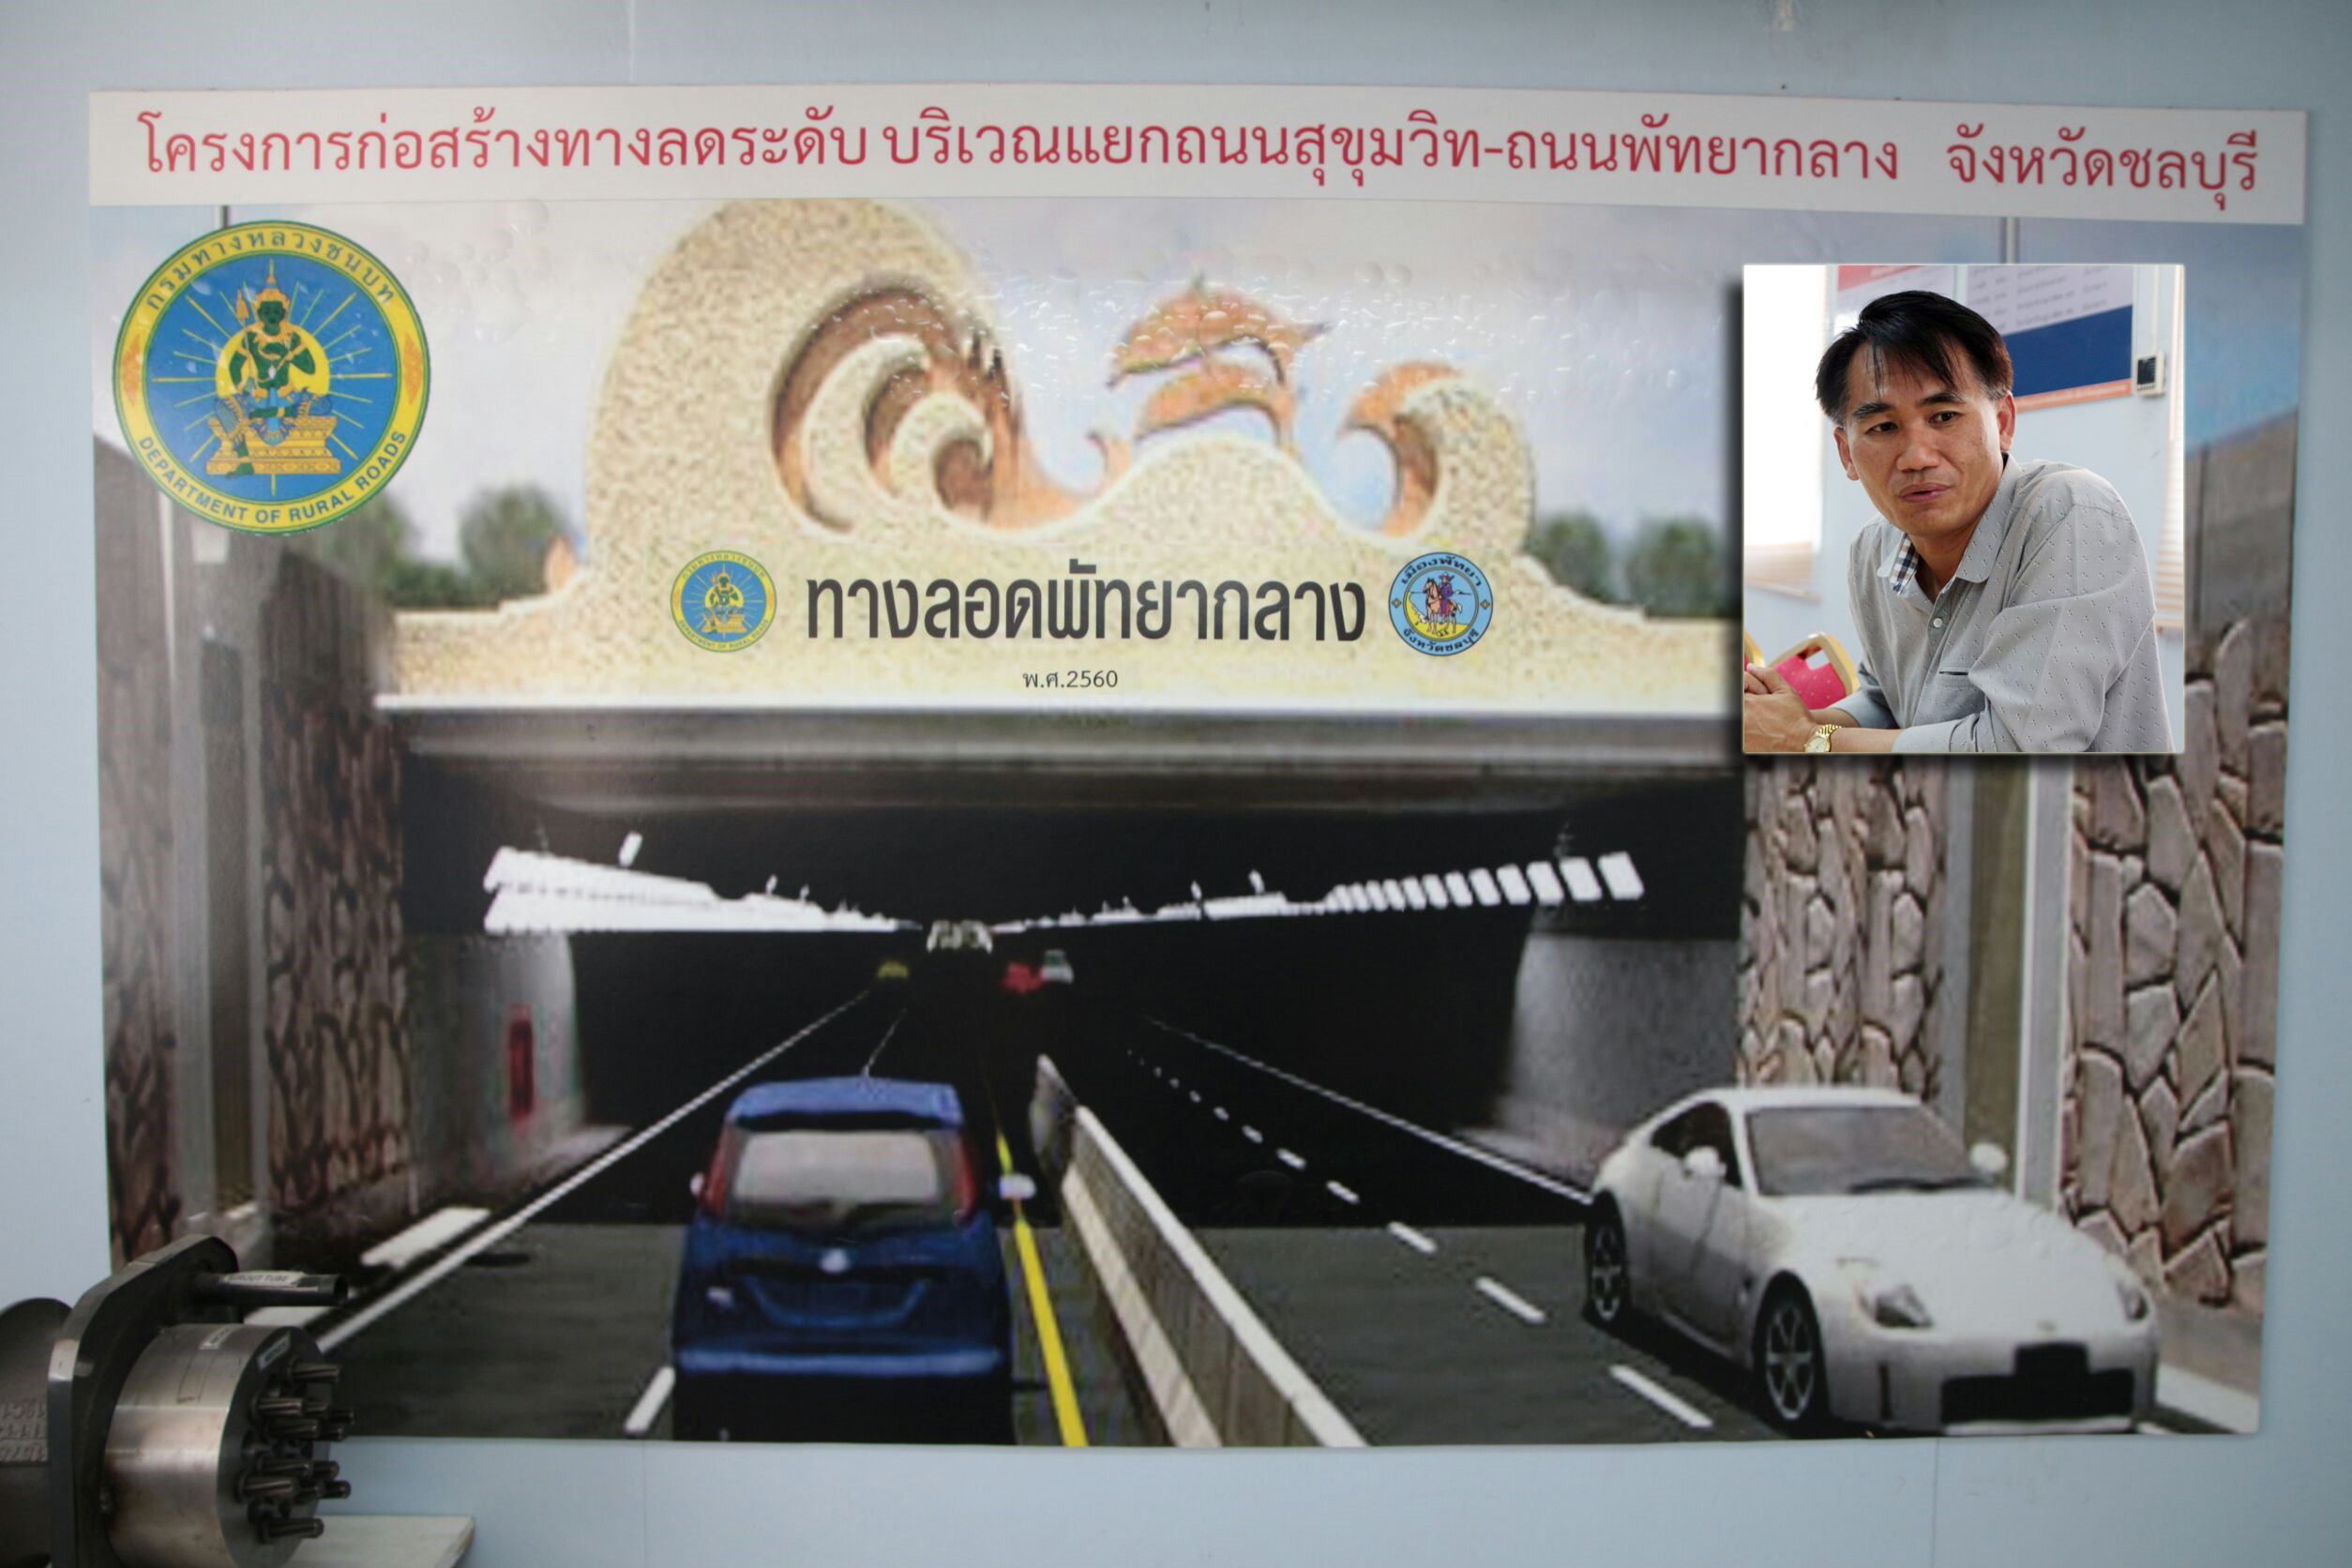 Chief engineer Thitiwat Anuruttikul (inset) said the Central Road bypass tunnel will open for Songkran from April 9-17, then close again to finish construction, scheduled to reopen for good in May. 